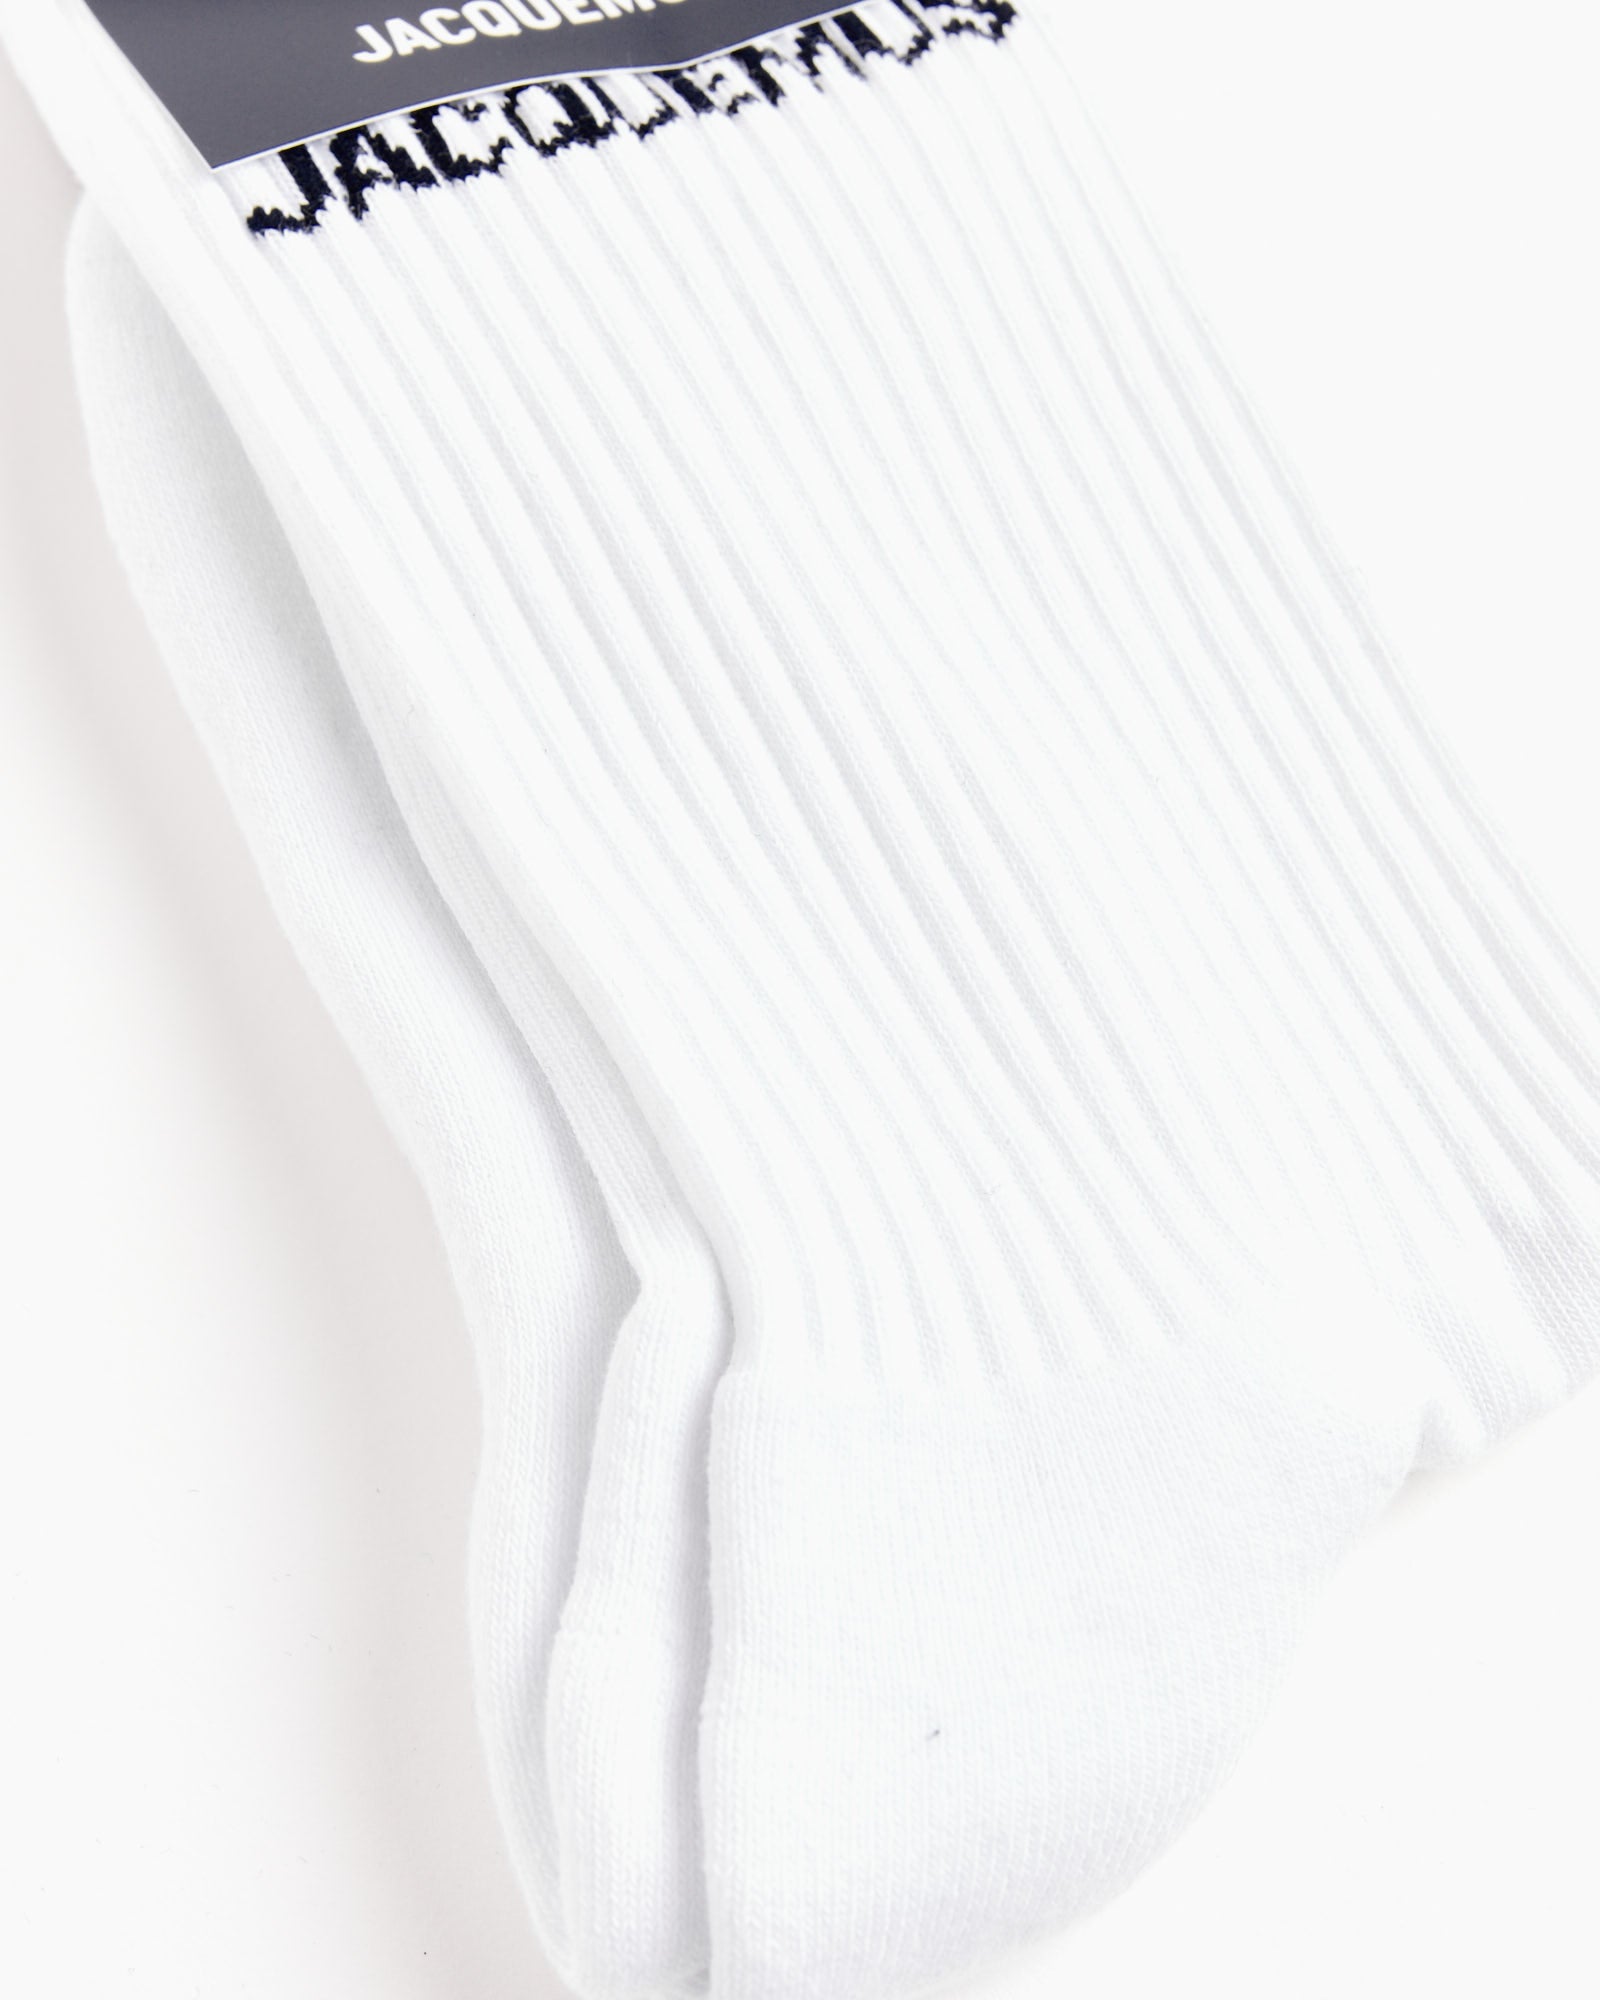 Les Chaussettes Socks in White